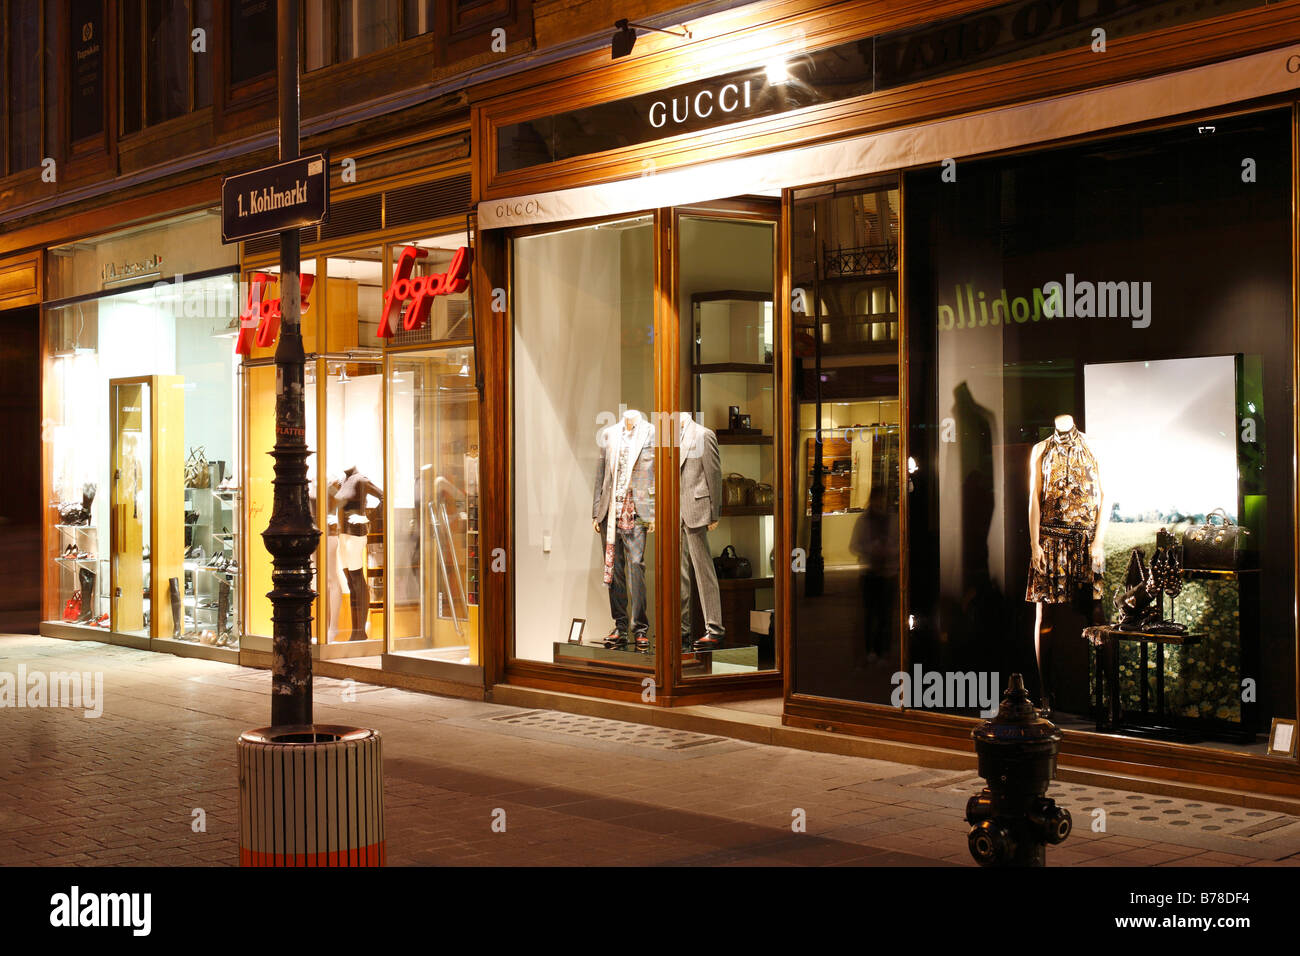 Page 3 - Schaufenster High Resolution Stock Photography and Images - Alamy